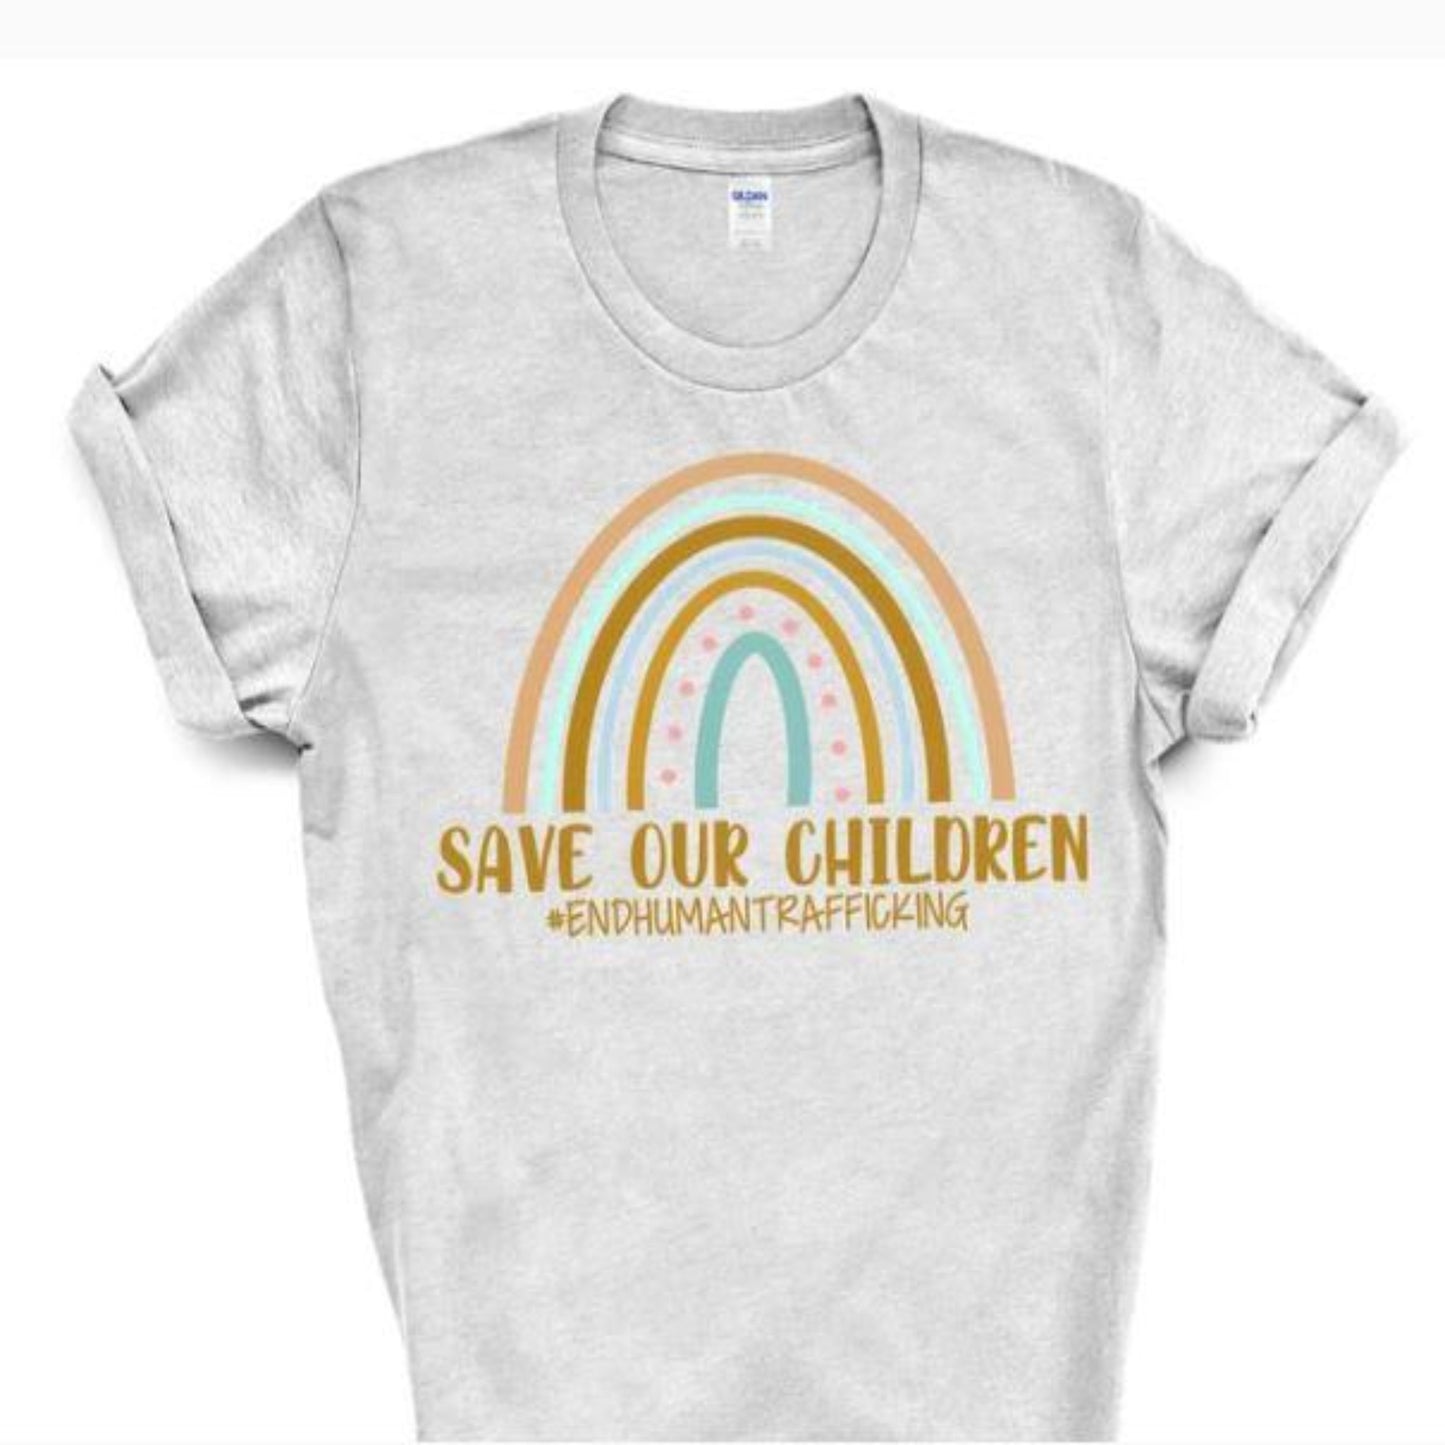 save_our_children_end_human_trafficking with rainbow design specialty tee comfortable shirt casual tshirt everyday tee